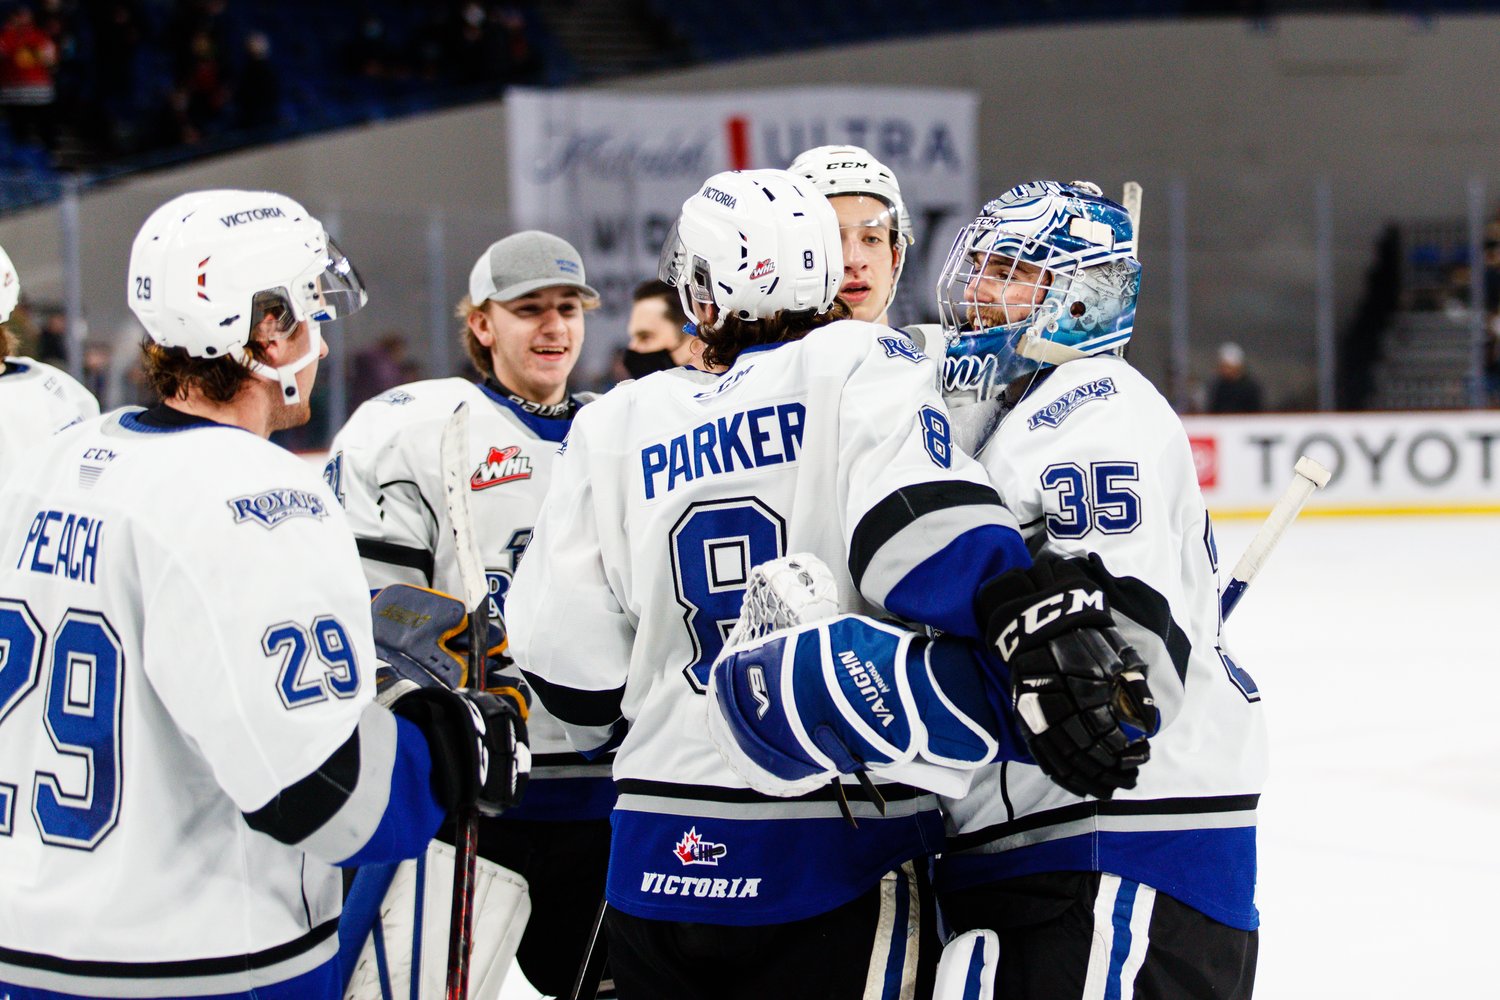 Campbell Arnold, Kalem Parker, Gannon Laroque, Tyler Palmer, and Bailey Peach celebrate a Victoria Royals win